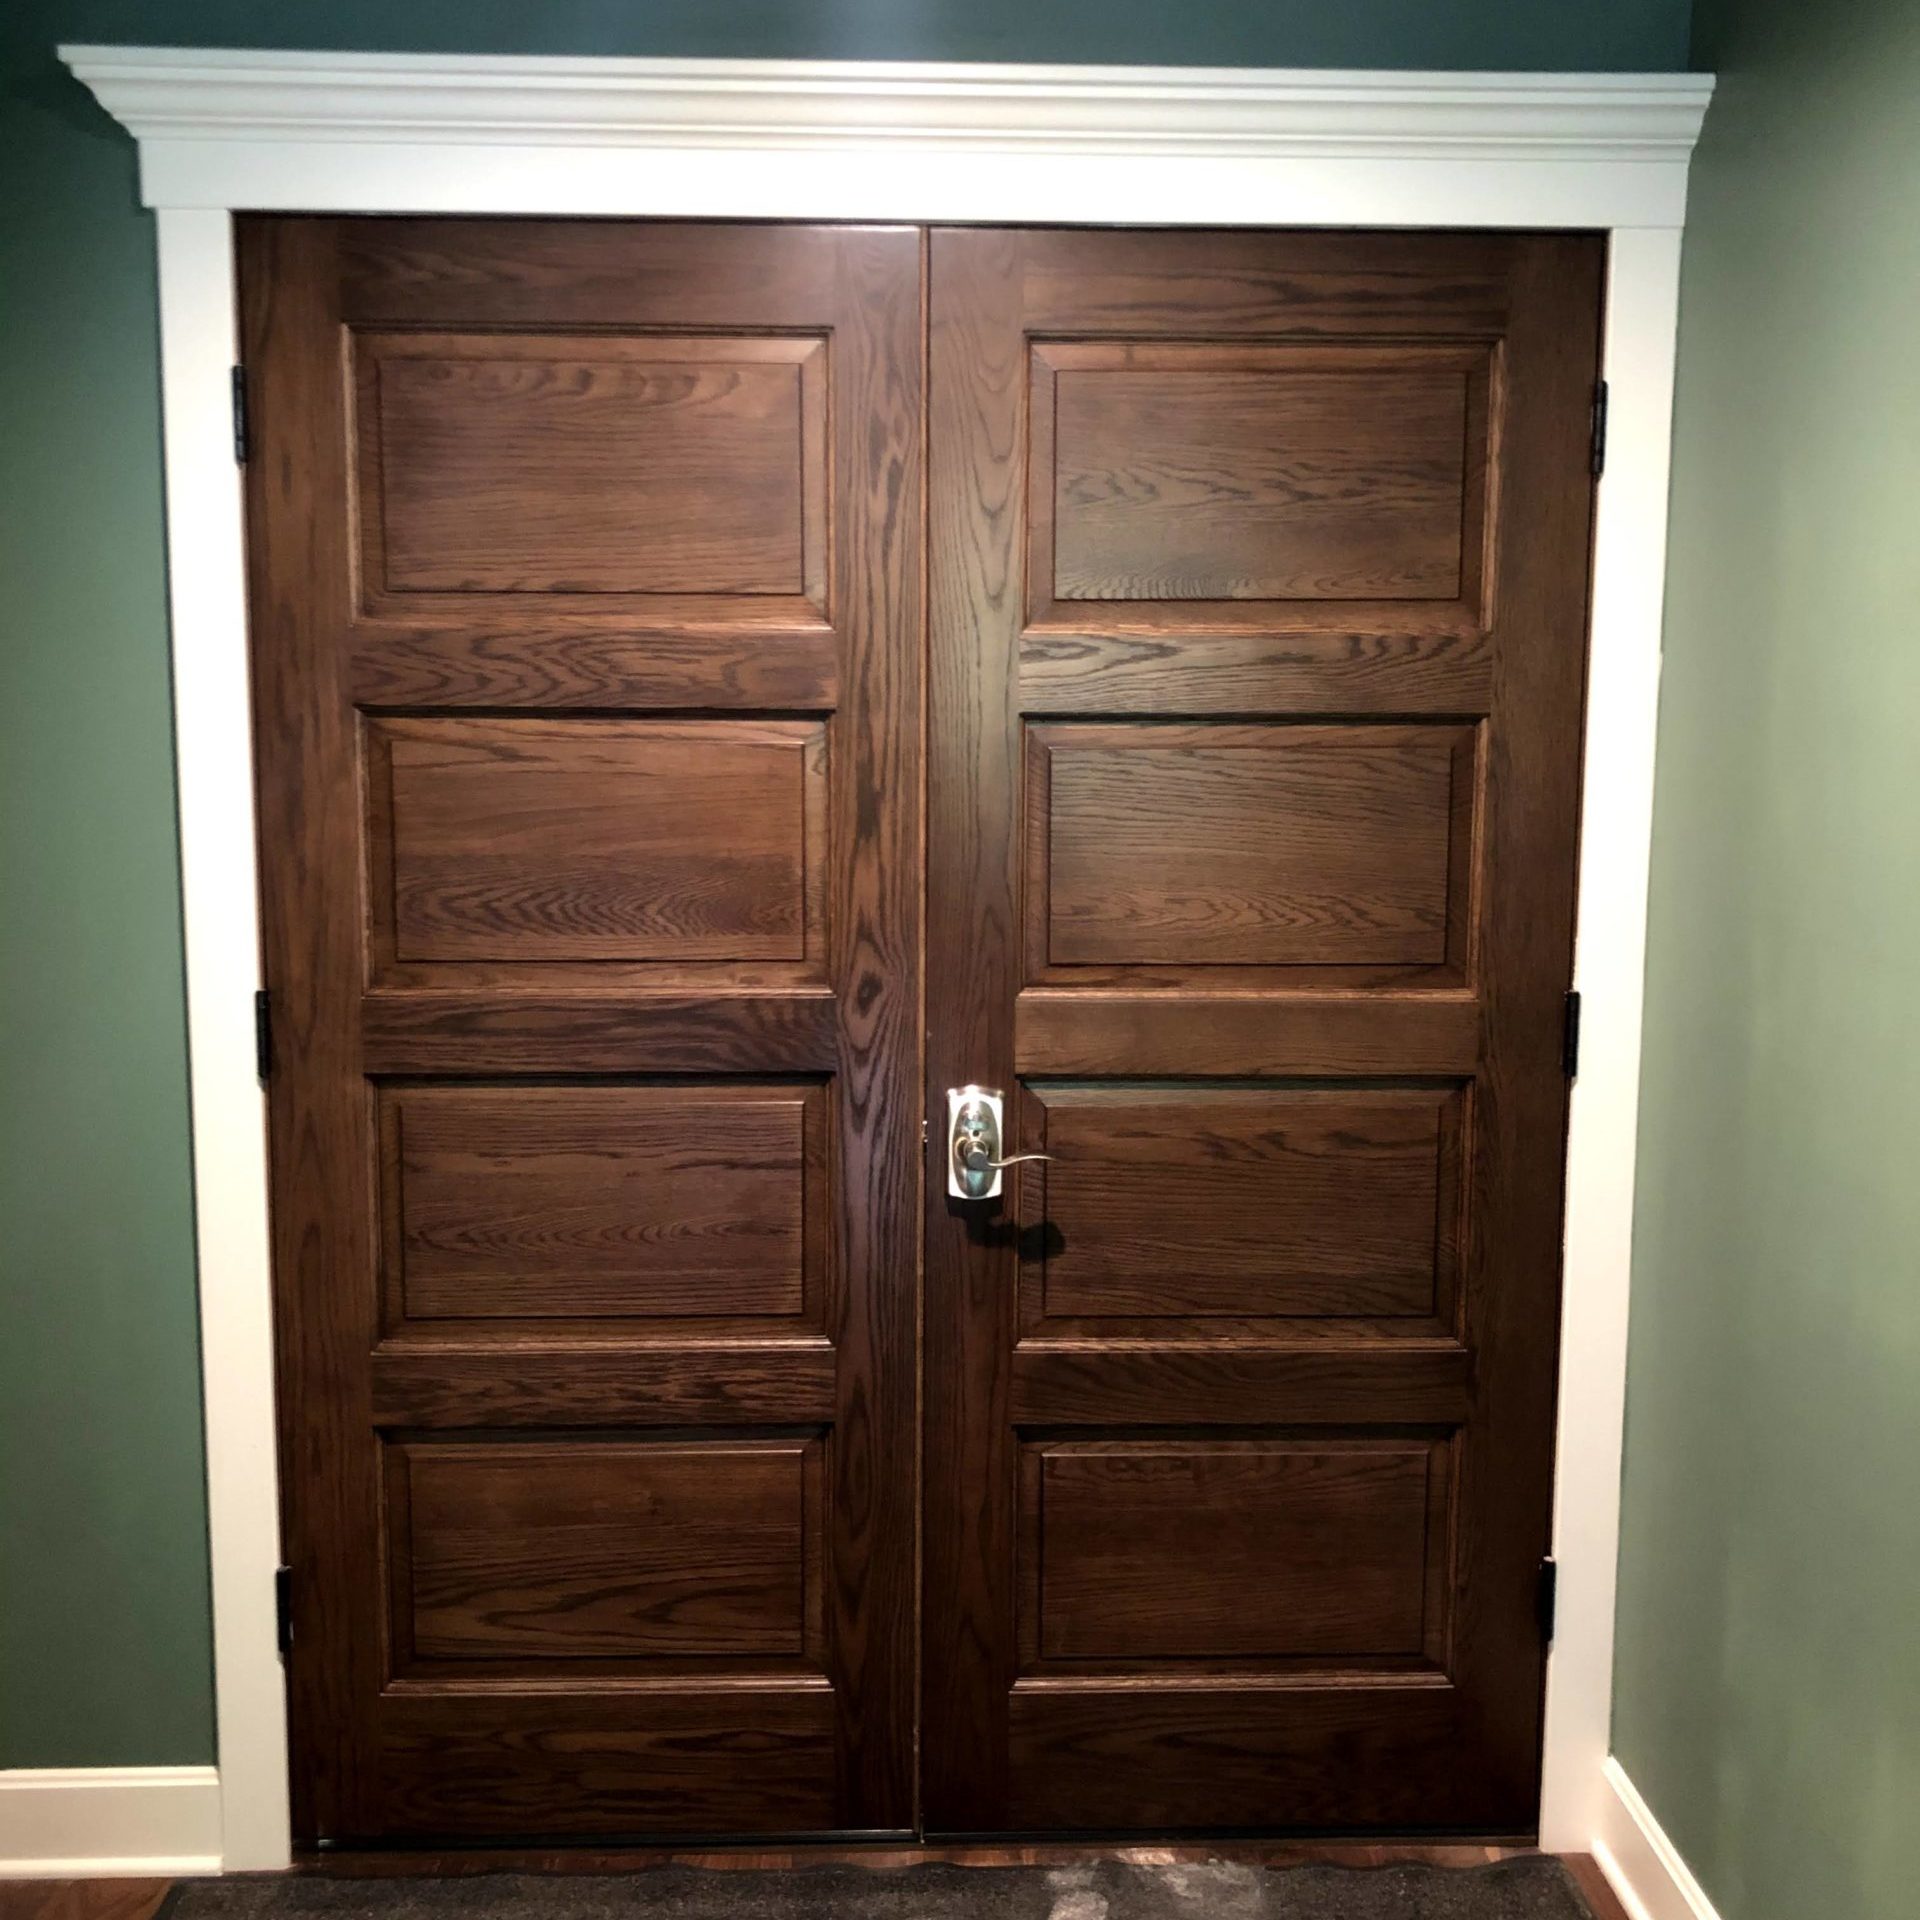 Mahogany Entry Door with Sidelights and Transom